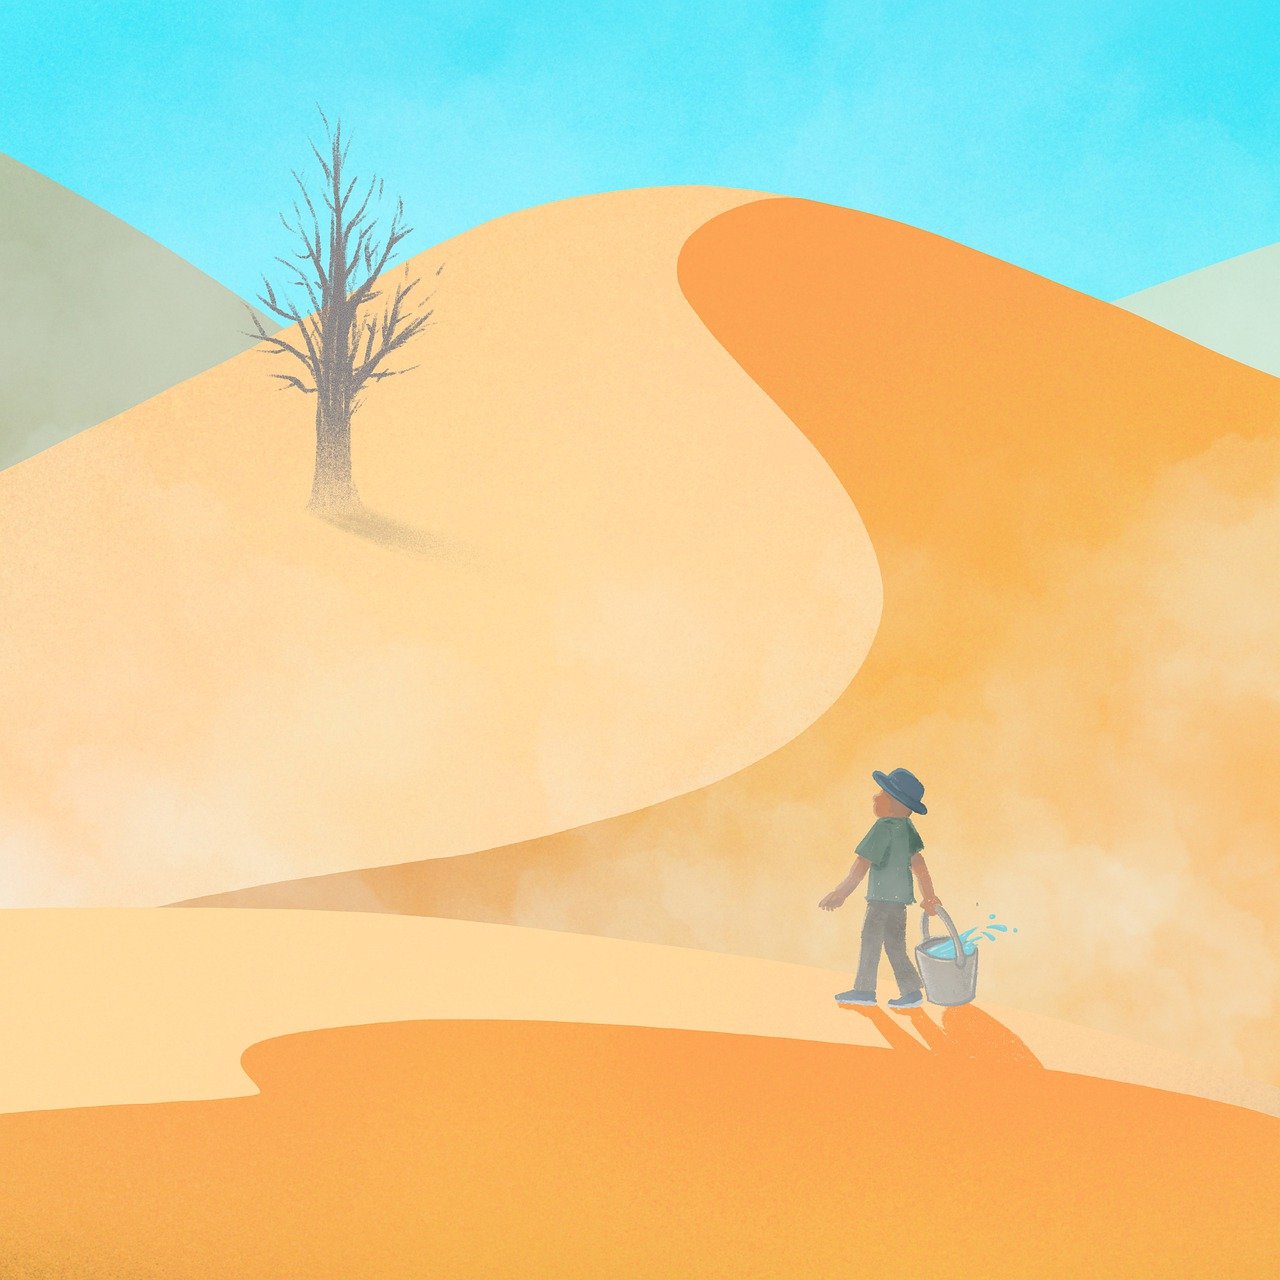 a man walking in the desert with a skateboard, concept art, inspired by Carl Spitzweg, lineless, from the sandman netflix show, the background is misty, farmer